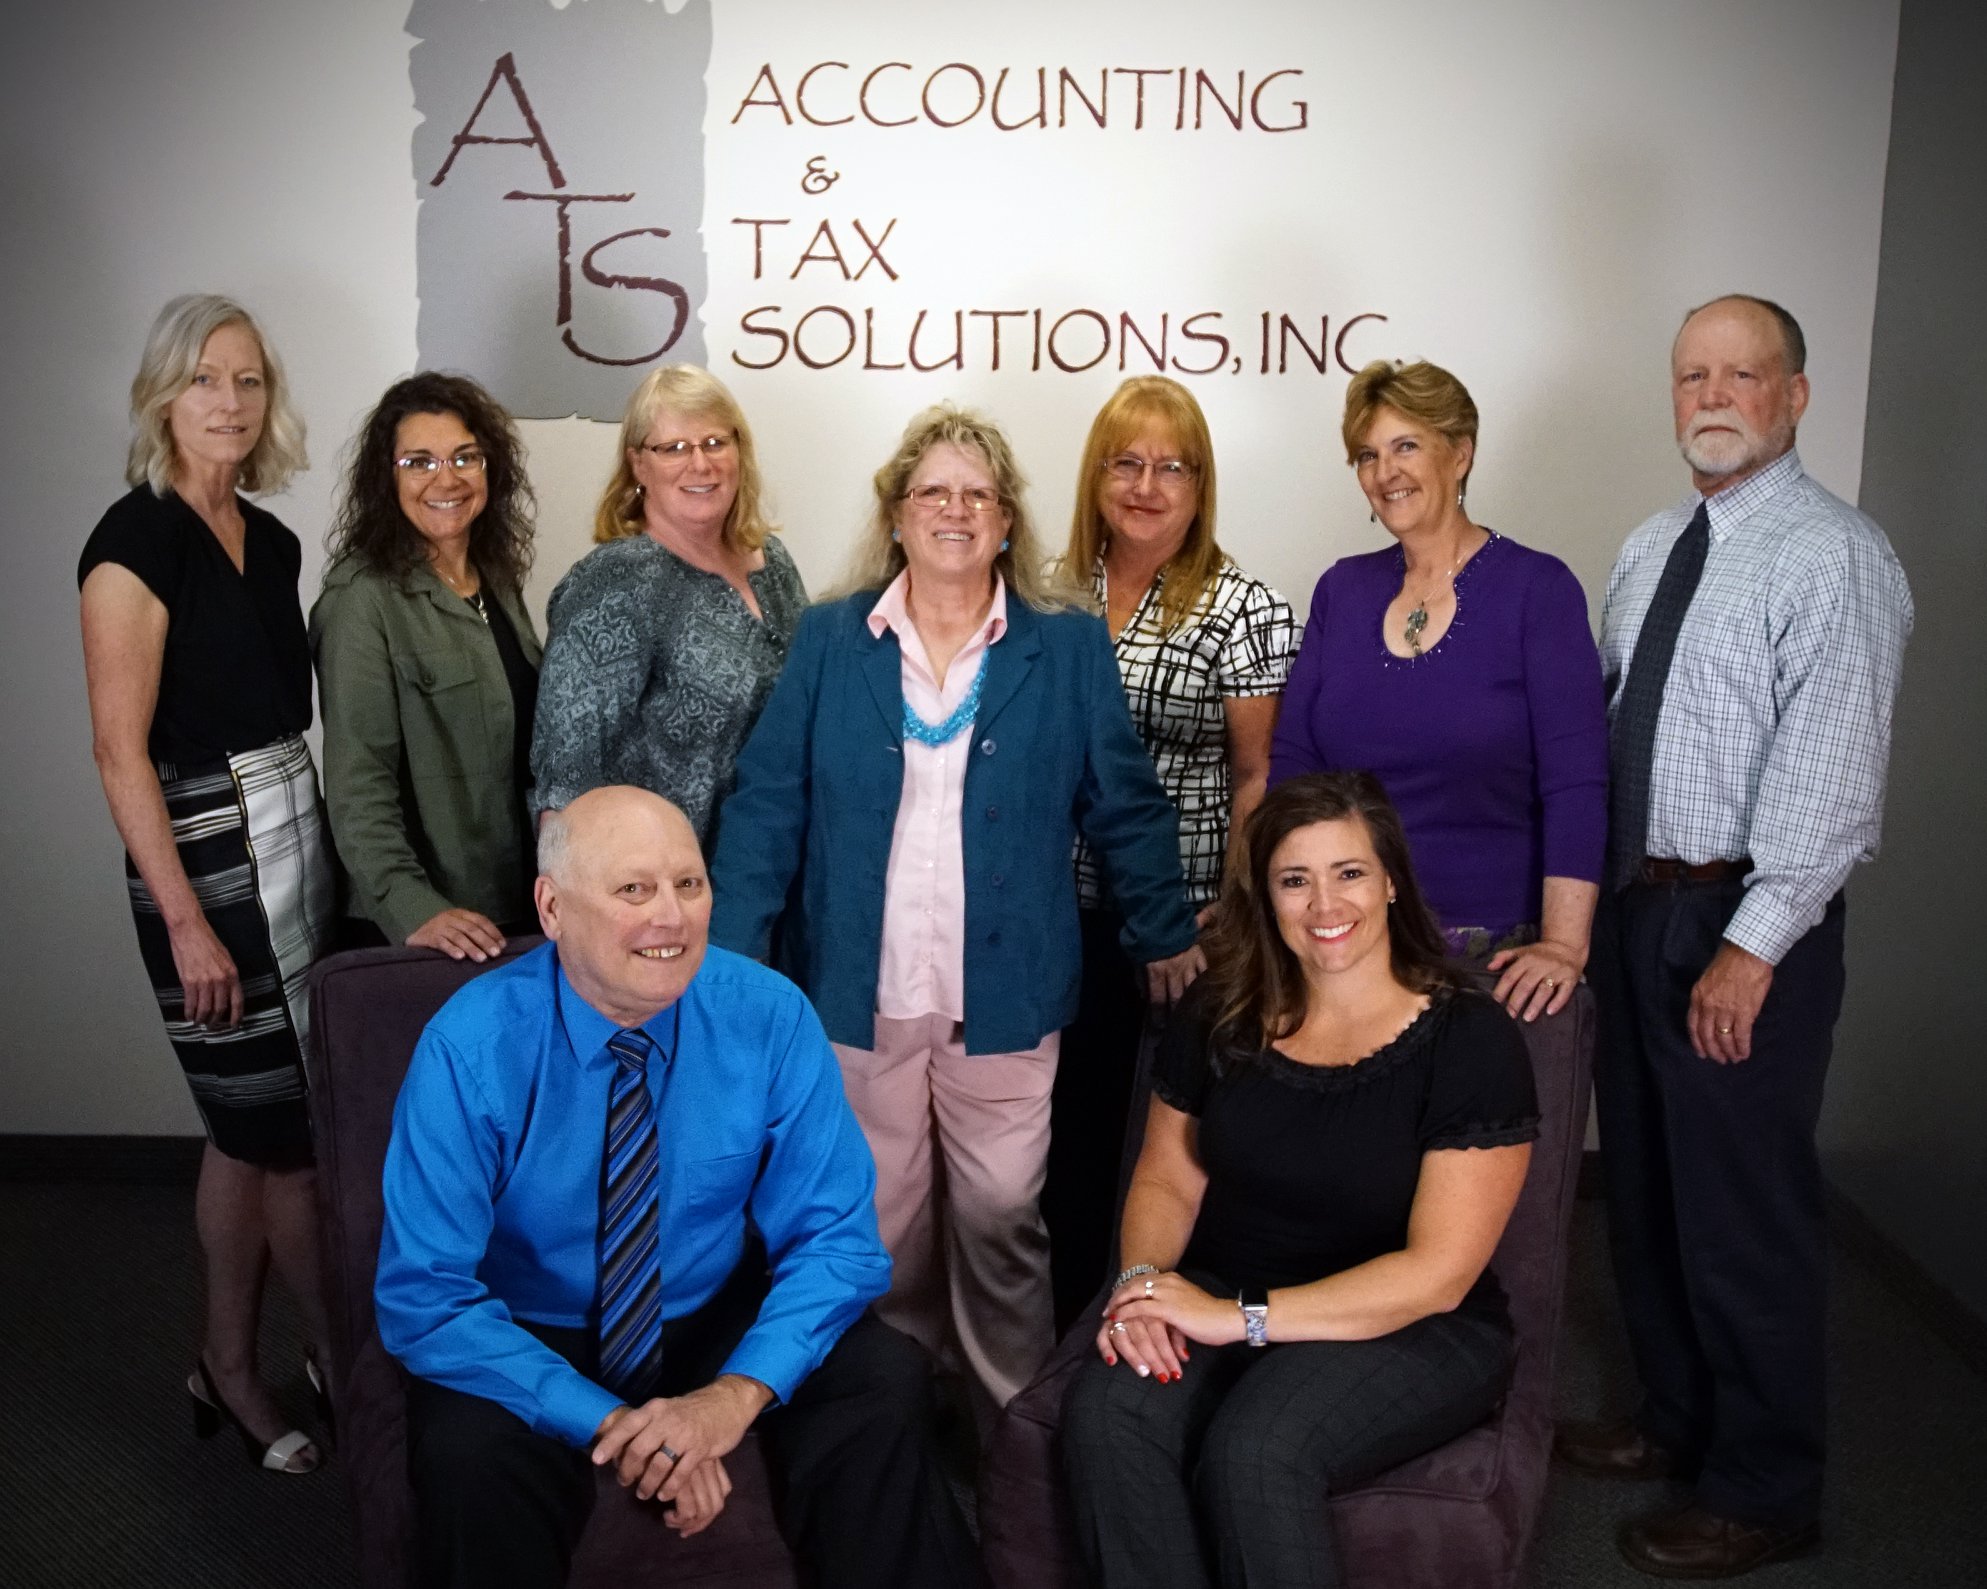 Accounting & Tax Solutions, Inc.